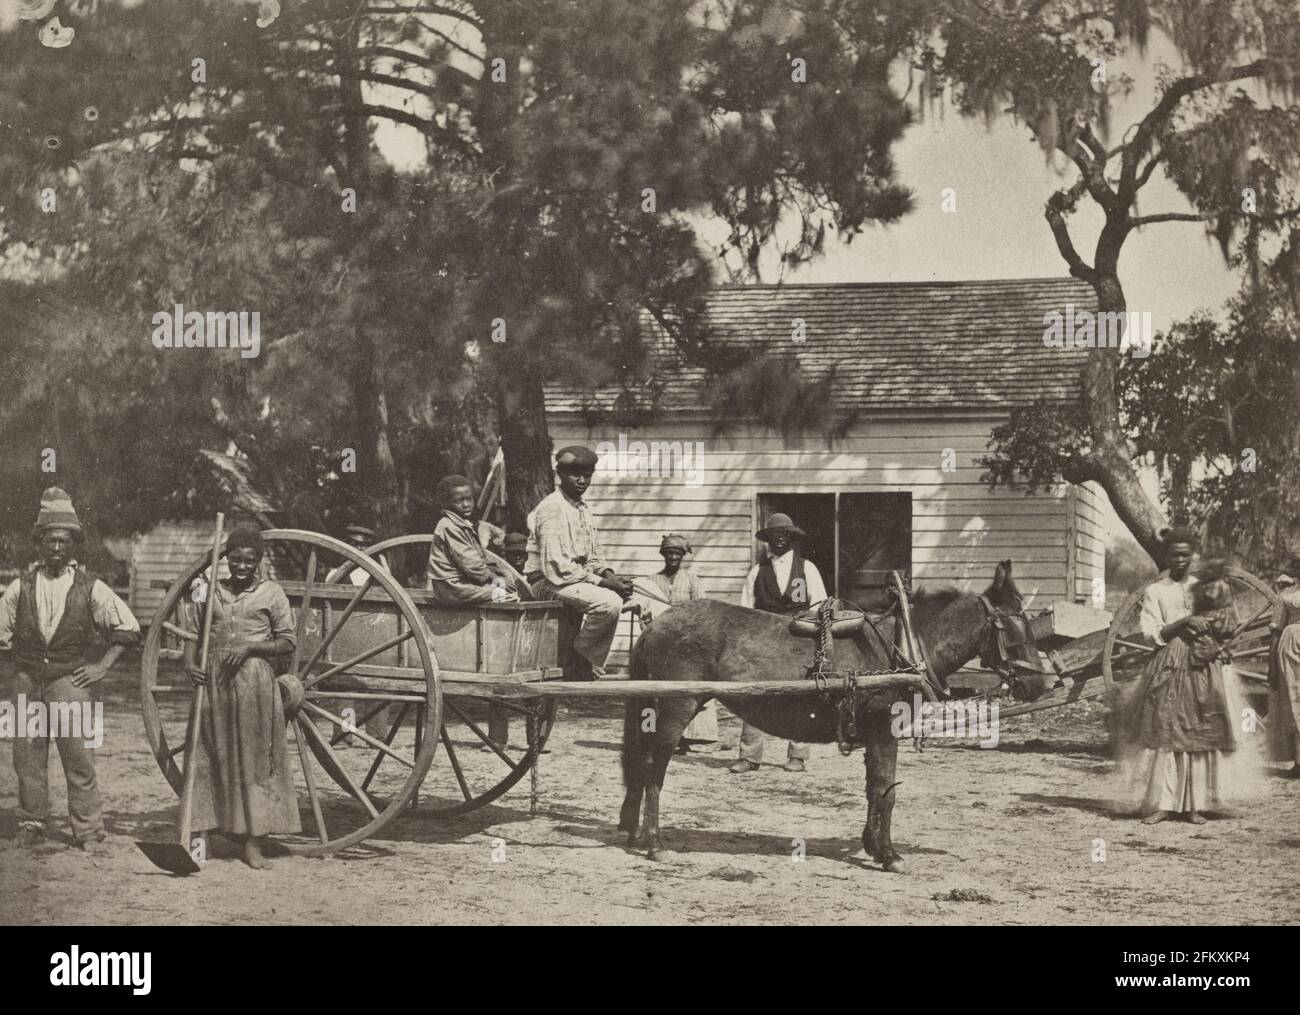 Negro slaves 1862 Edisto Island, S.C. (plantation of James Hopkinson) -  Photo shows a group of African American slaves posed around a horse-drawn cart, with a building in the background, at the Cassina Point plantation of James Hopkinson on Edisto Island, South Carolina Stock Photo